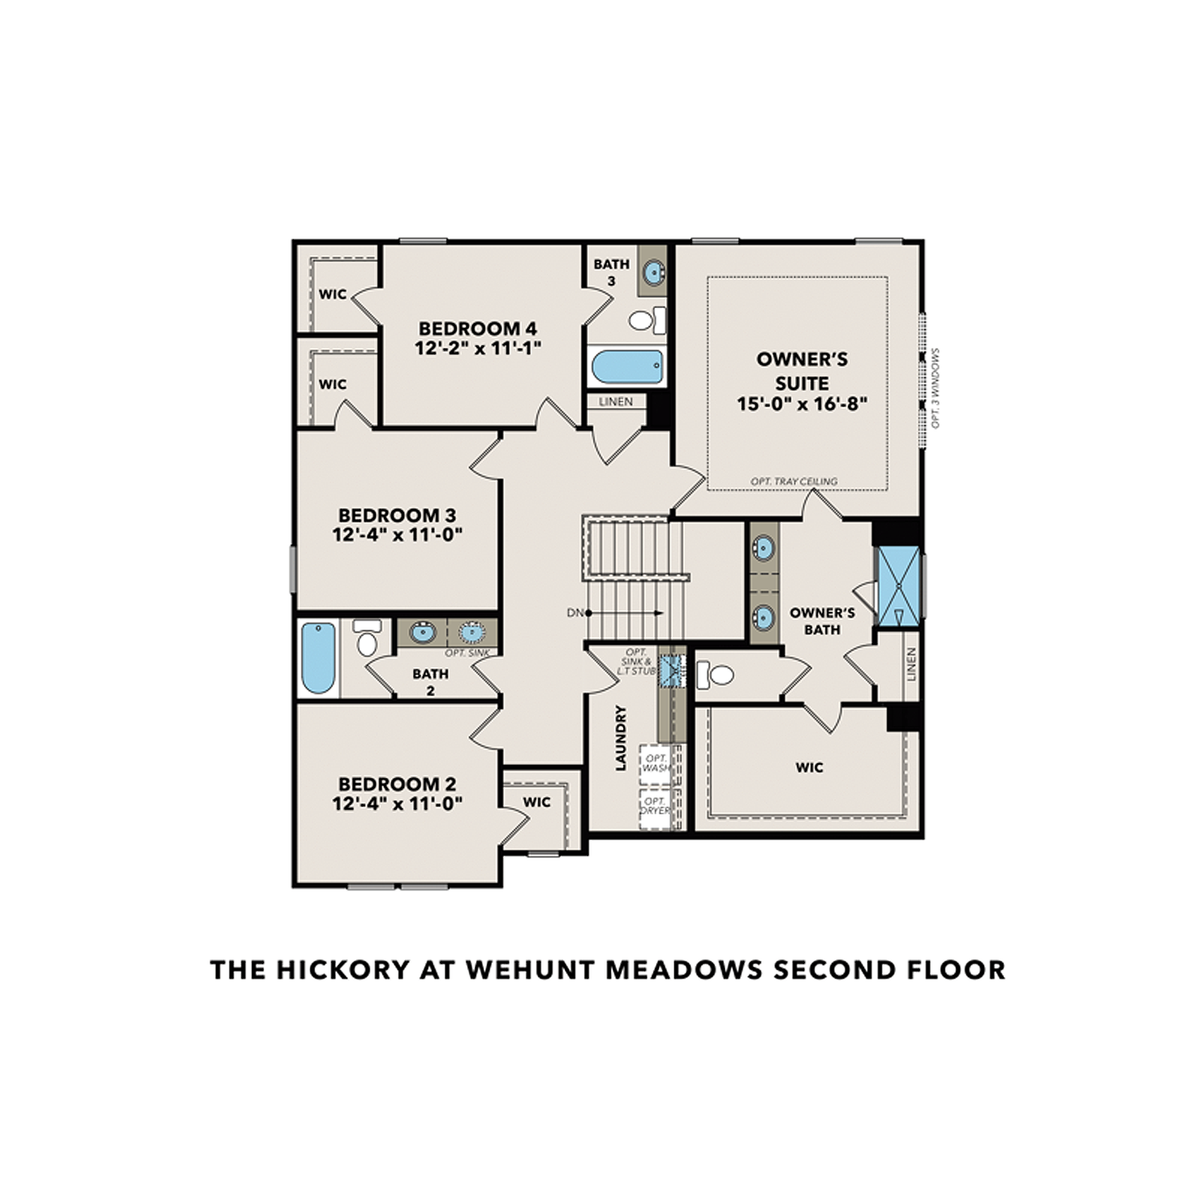 2 - The Hickory A at Wehunt Meadows buildable floor plan layout in Davidson Homes' Wehunt Meadows community.